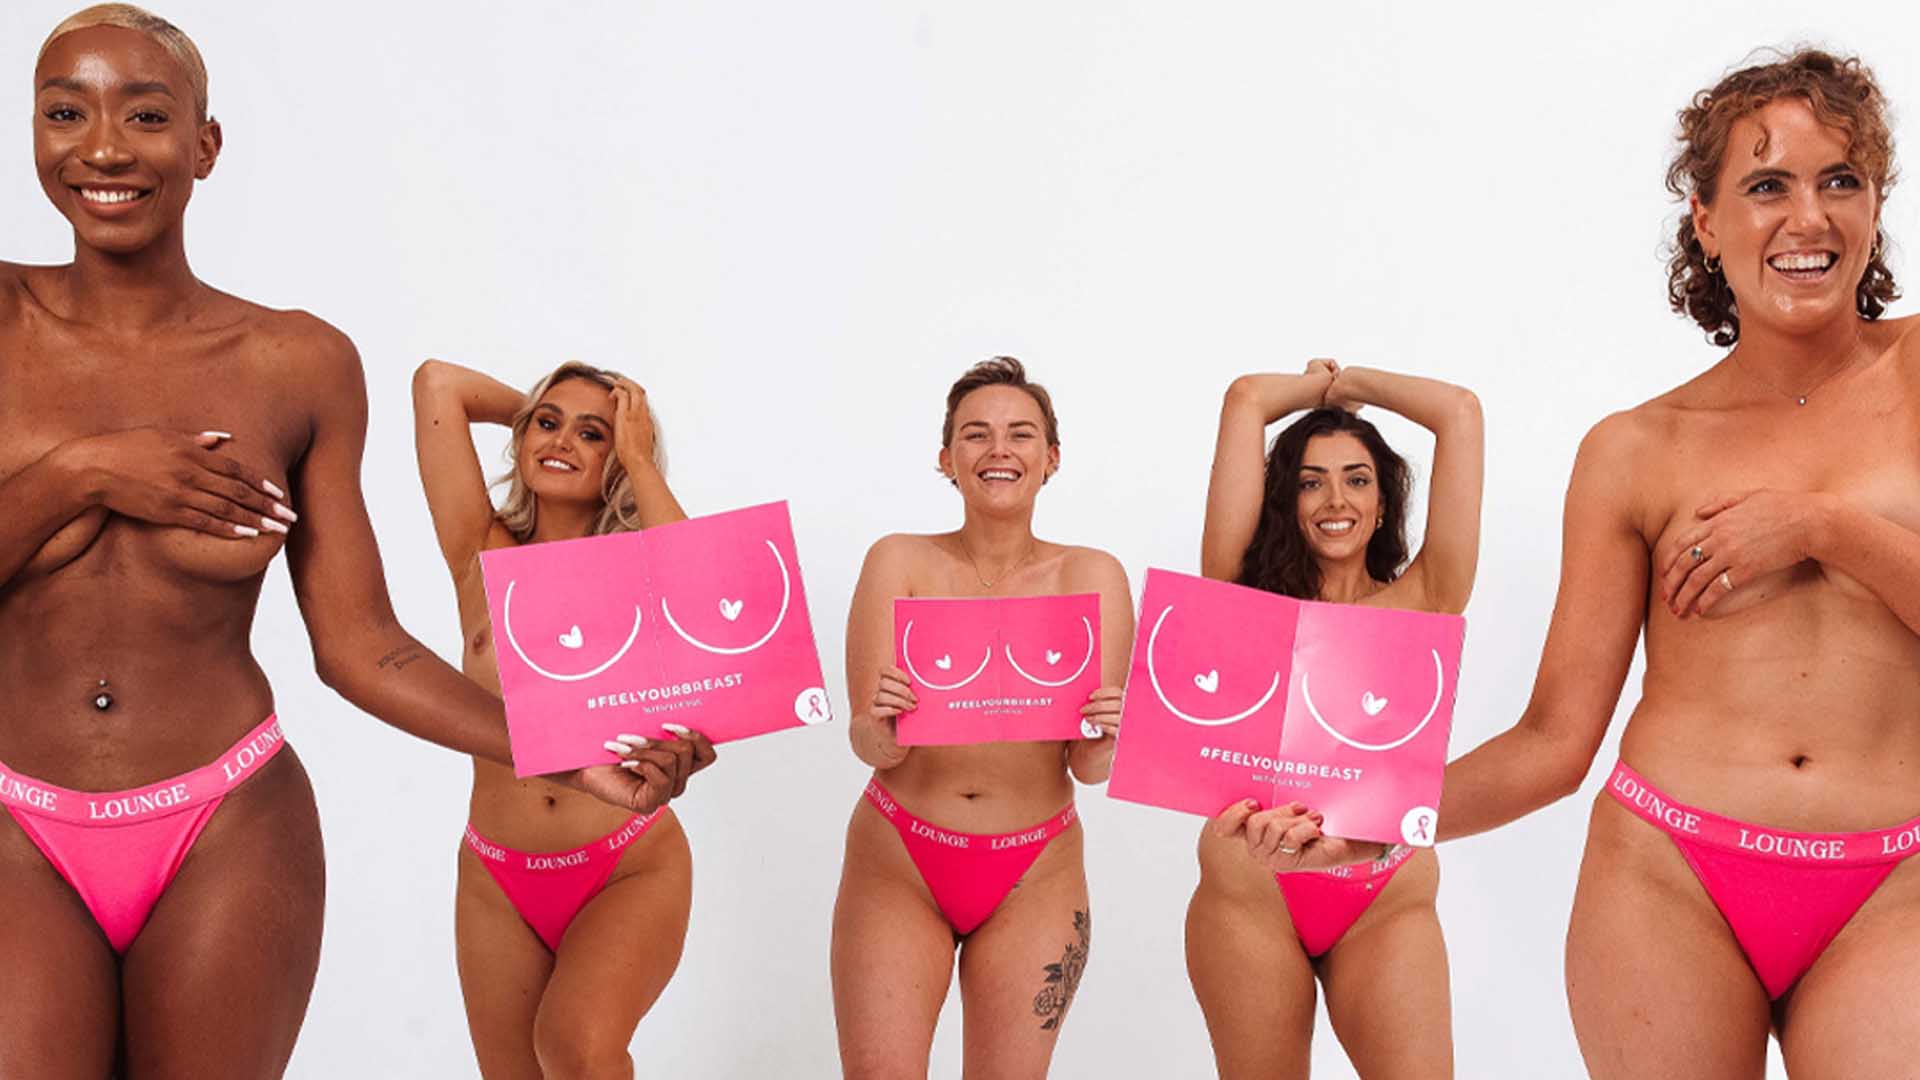 Lounge Underwear - Our legendary #FeelYourBreast Campaign is BACK 💗 And  this year we've got 100,000 pink thongs up for grabs! We hope you are as  excited as we are 😍🙋‍♀️ 7PM